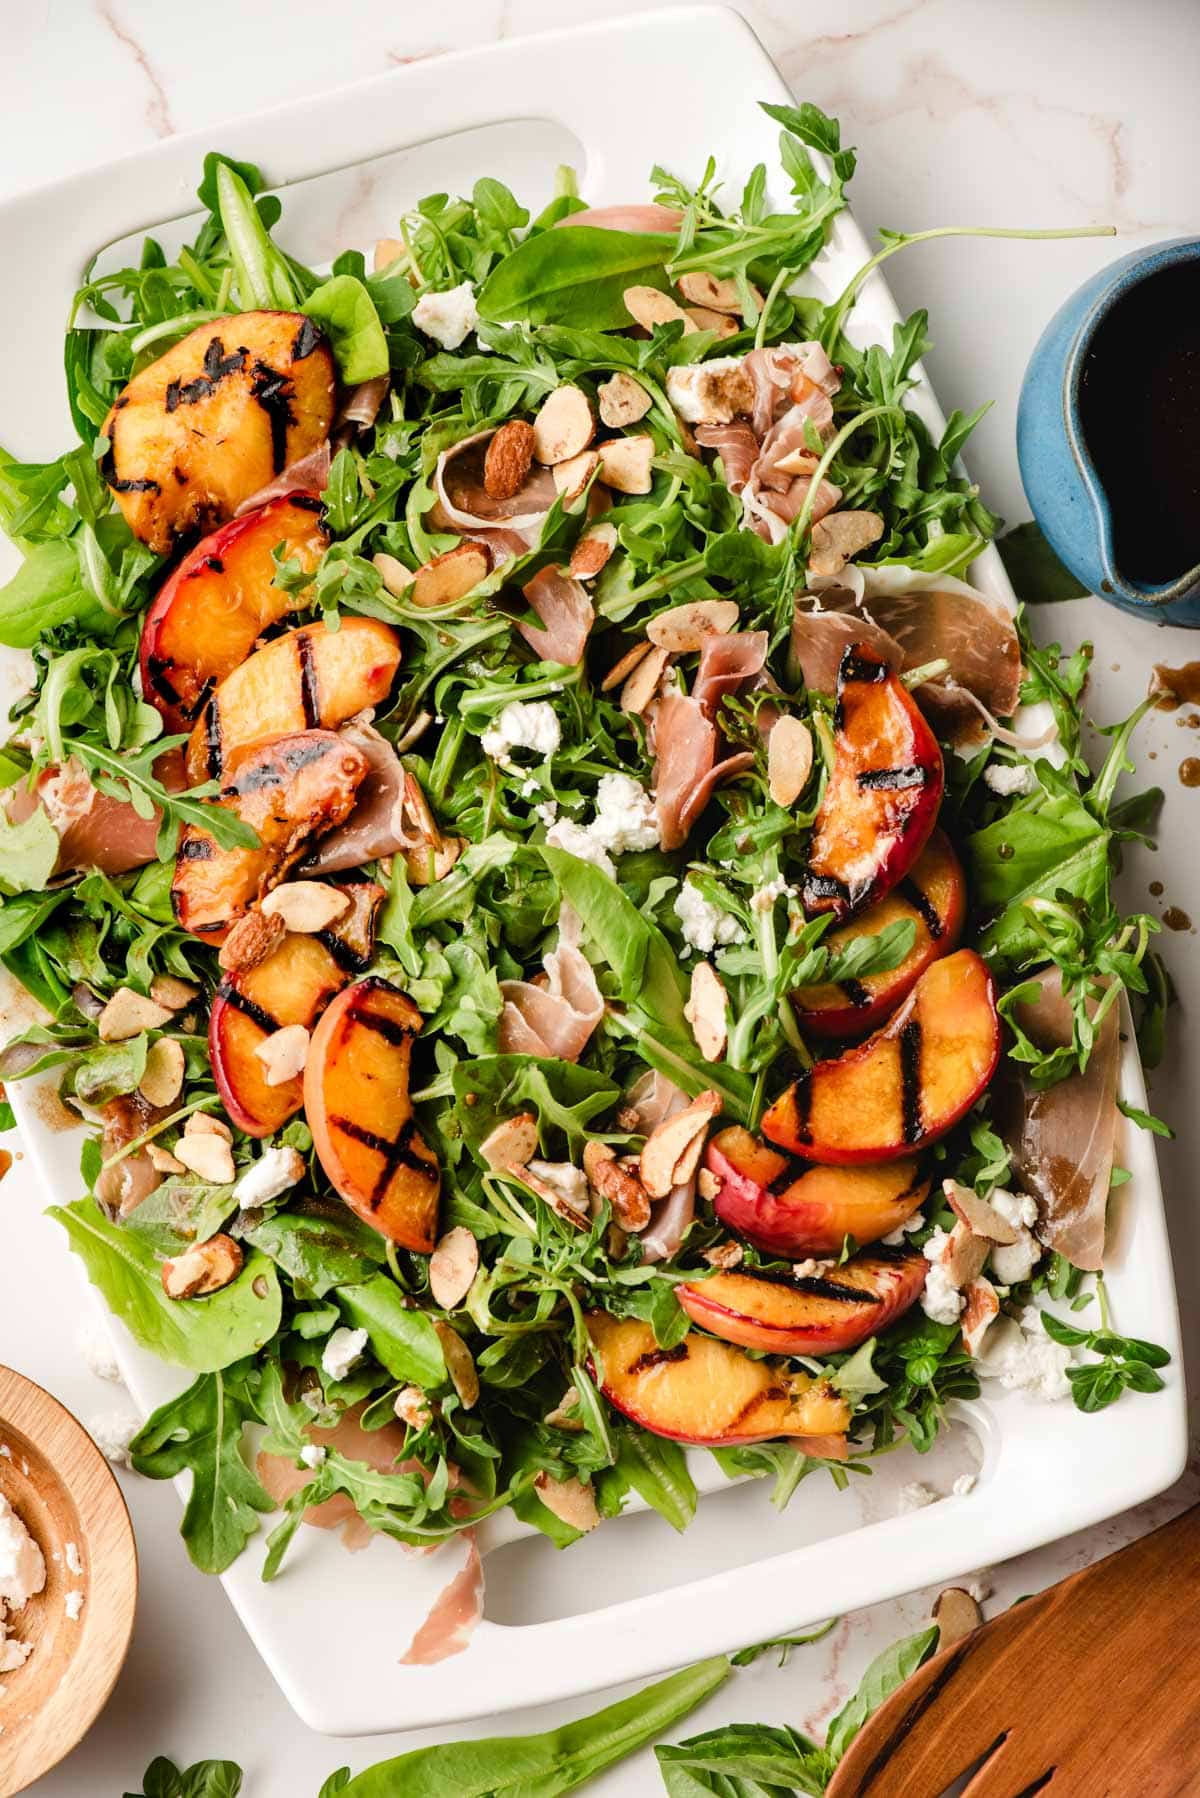 Salad platter with grilled peaches, basil, goat cheese, almonds, prosciutto, and balsamic vinaigrette.